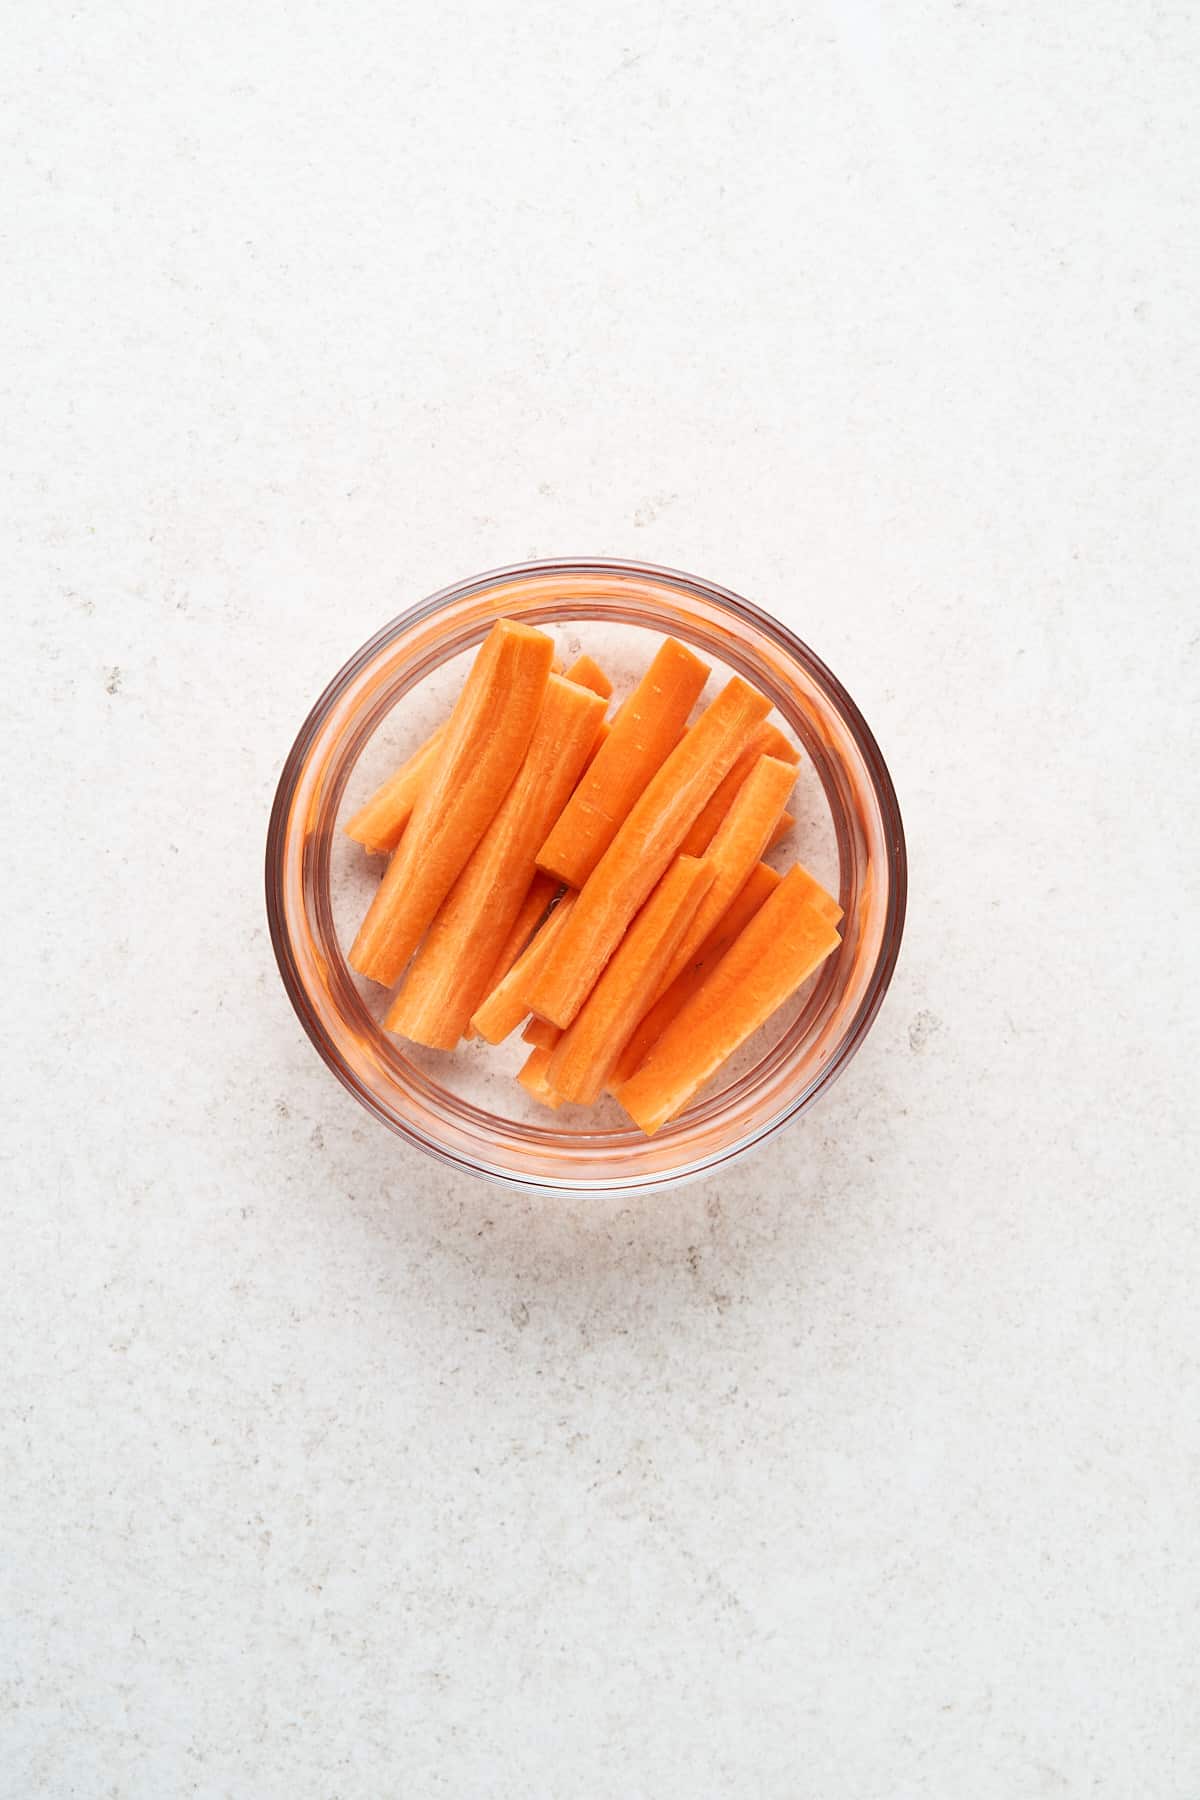 Carrot sticks in a container of water.